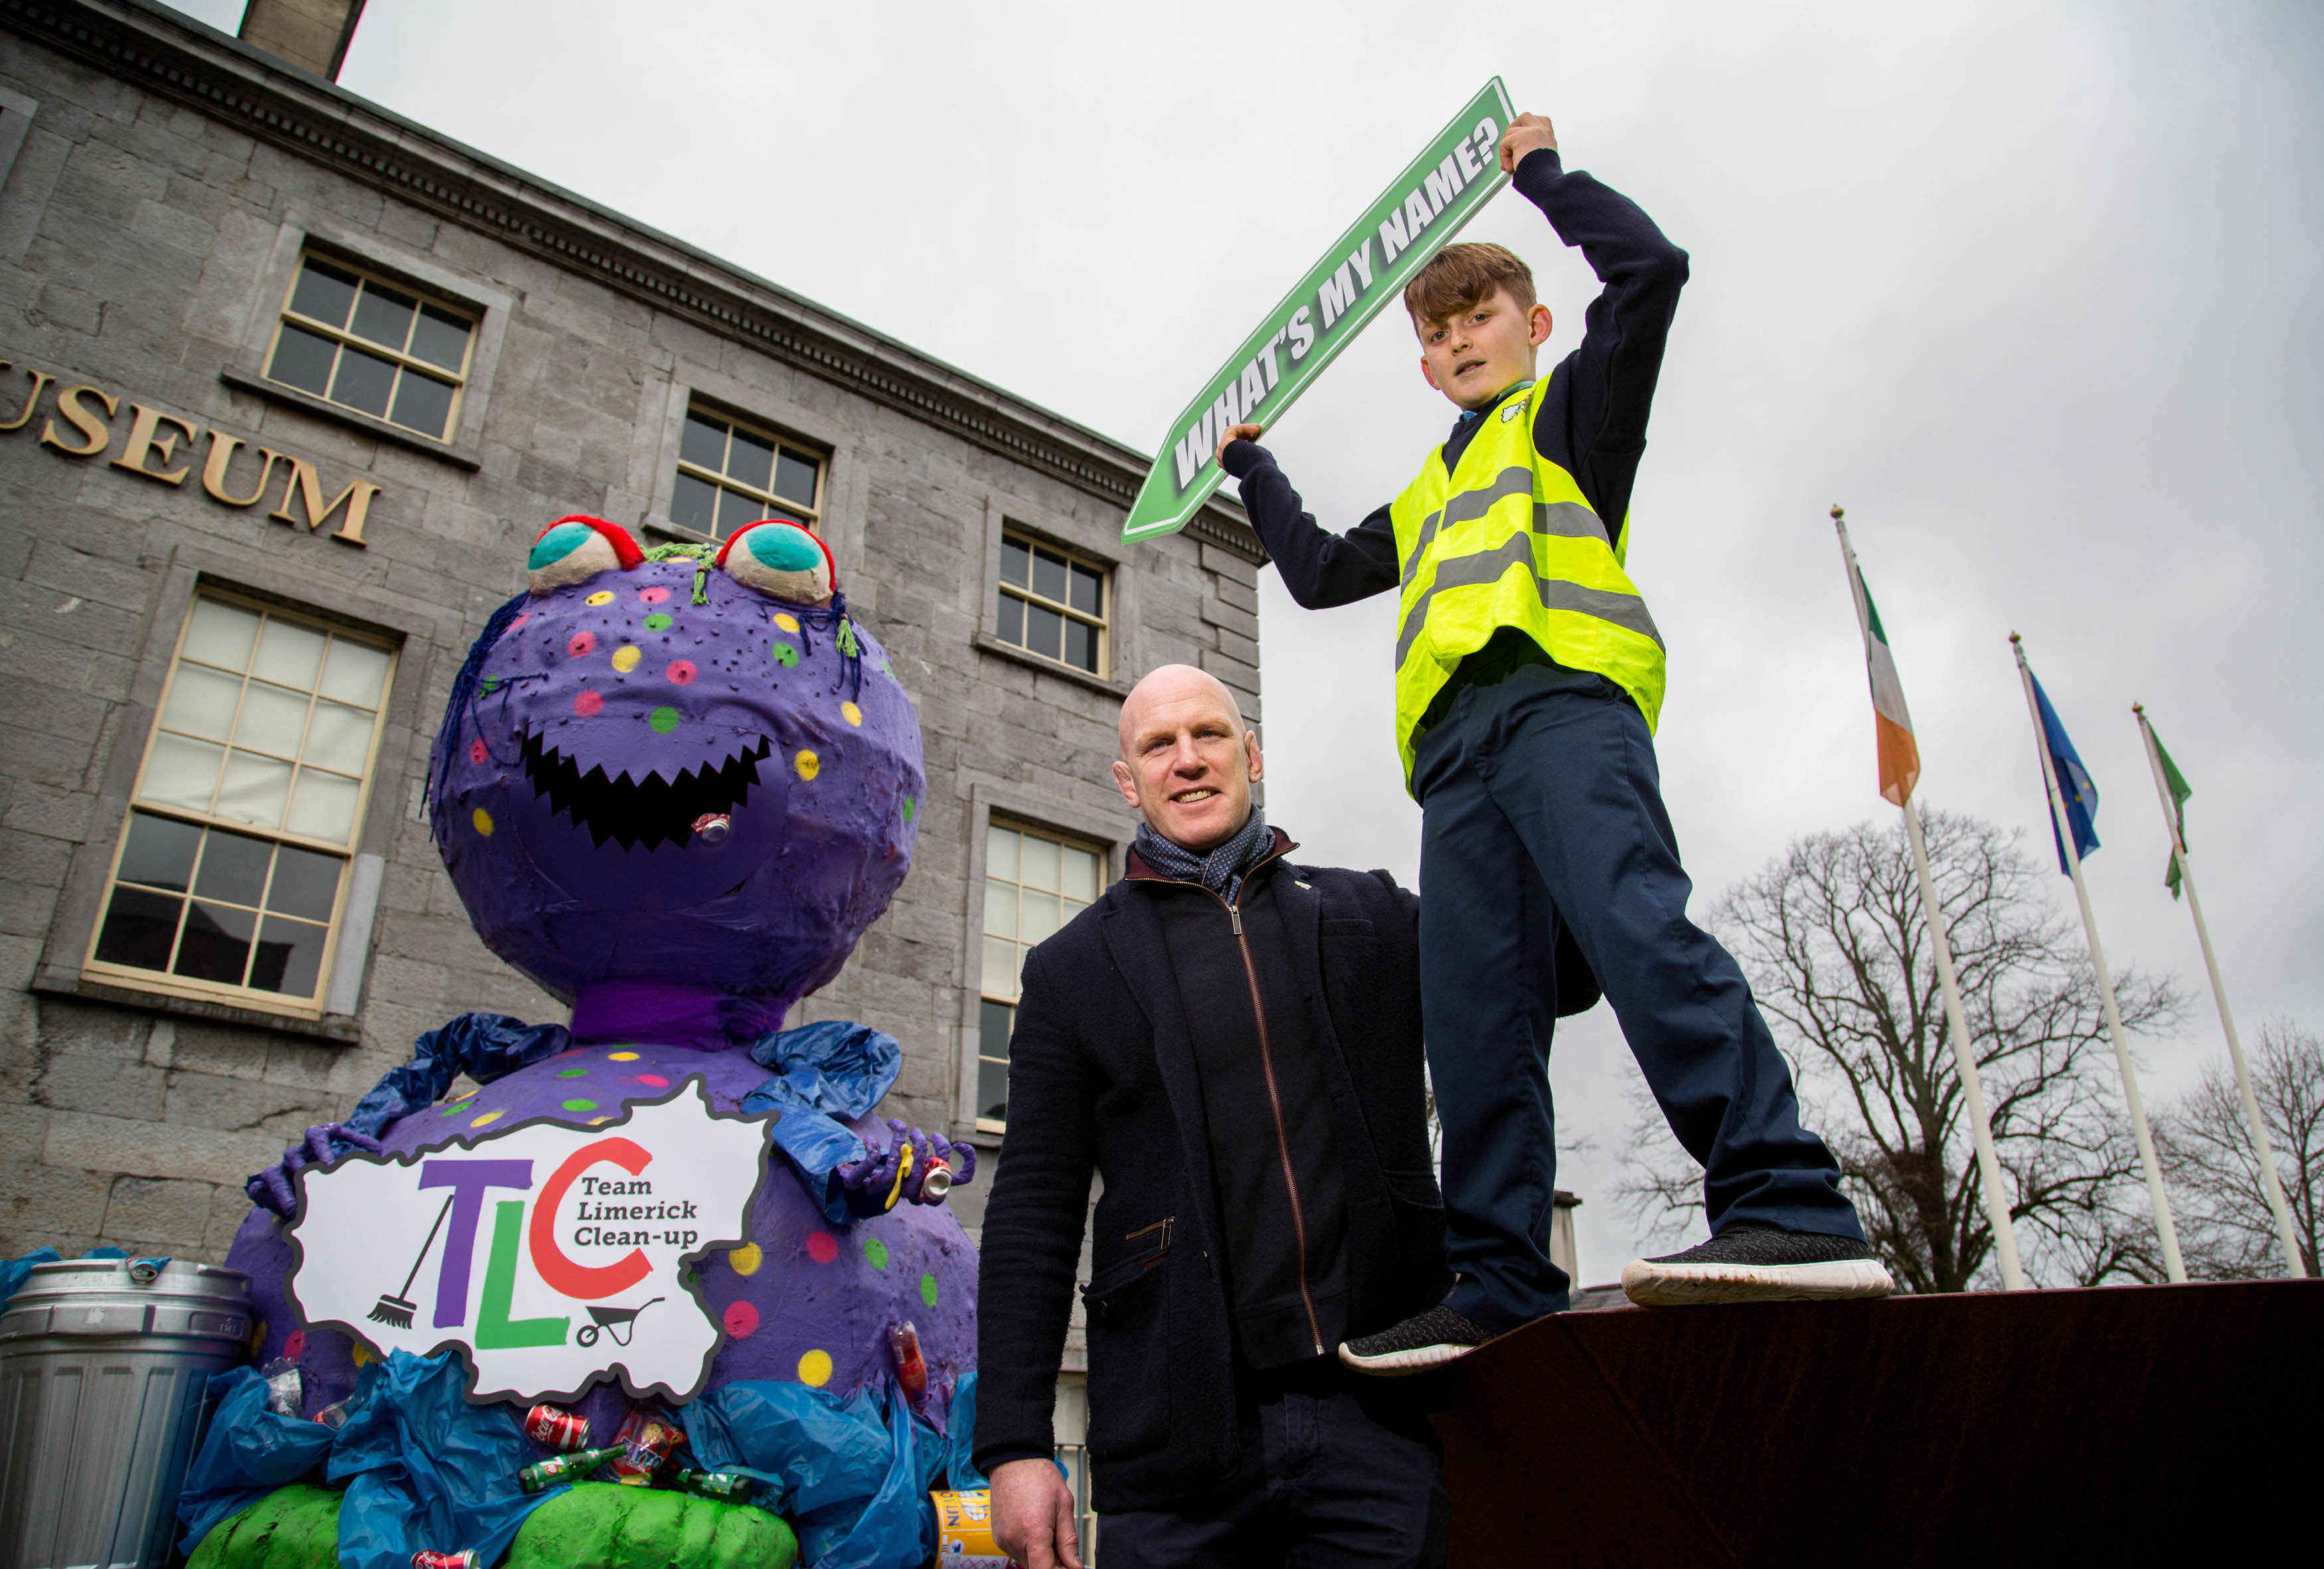 Paul O'Connell Launches Quest to Name TLC3 Mascot